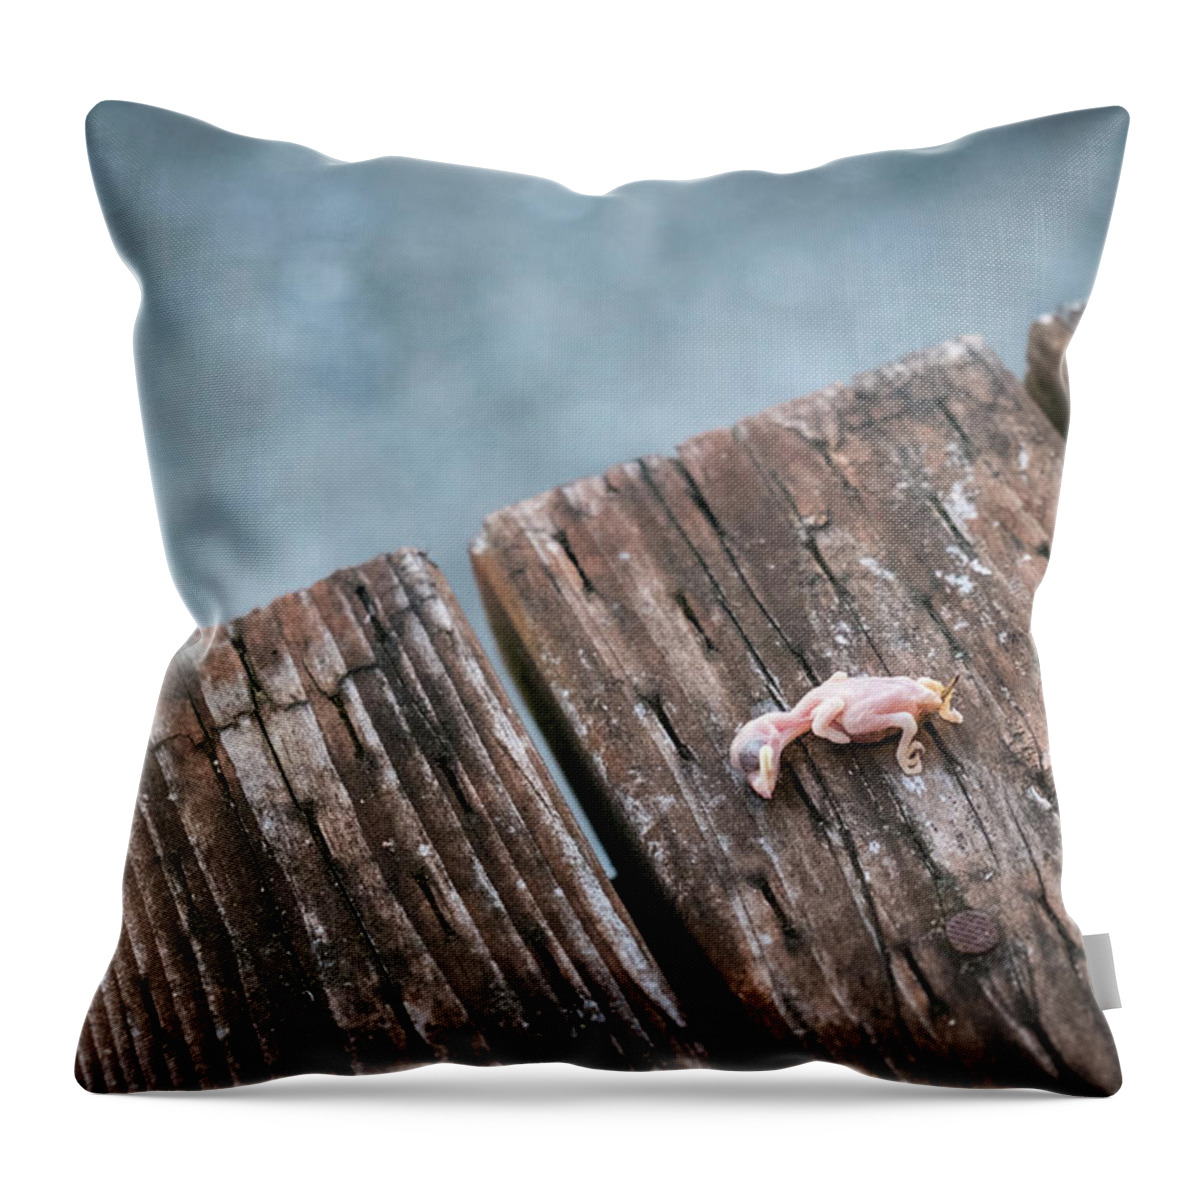 Animals Throw Pillow featuring the photograph Life Abbreviated by Mary Lee Dereske